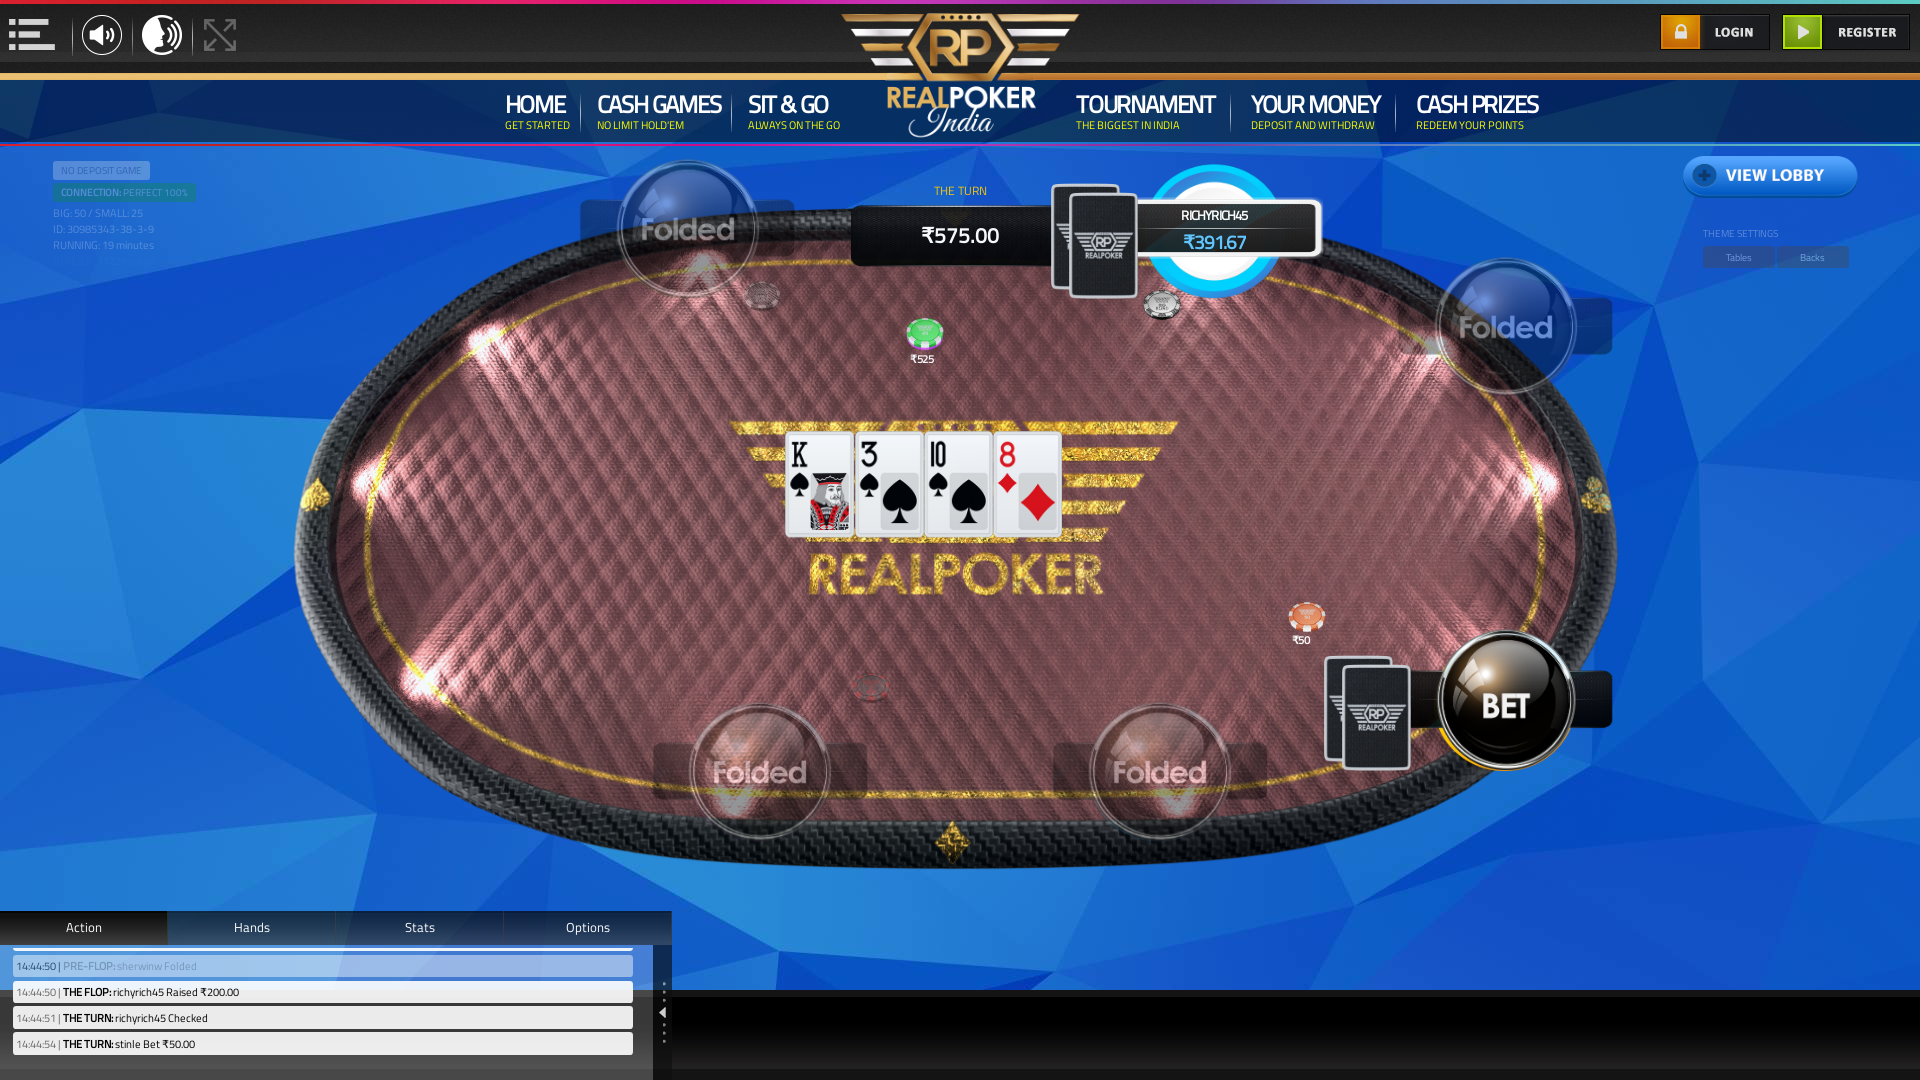 Real poker 10 player table in the 19th minute of the match